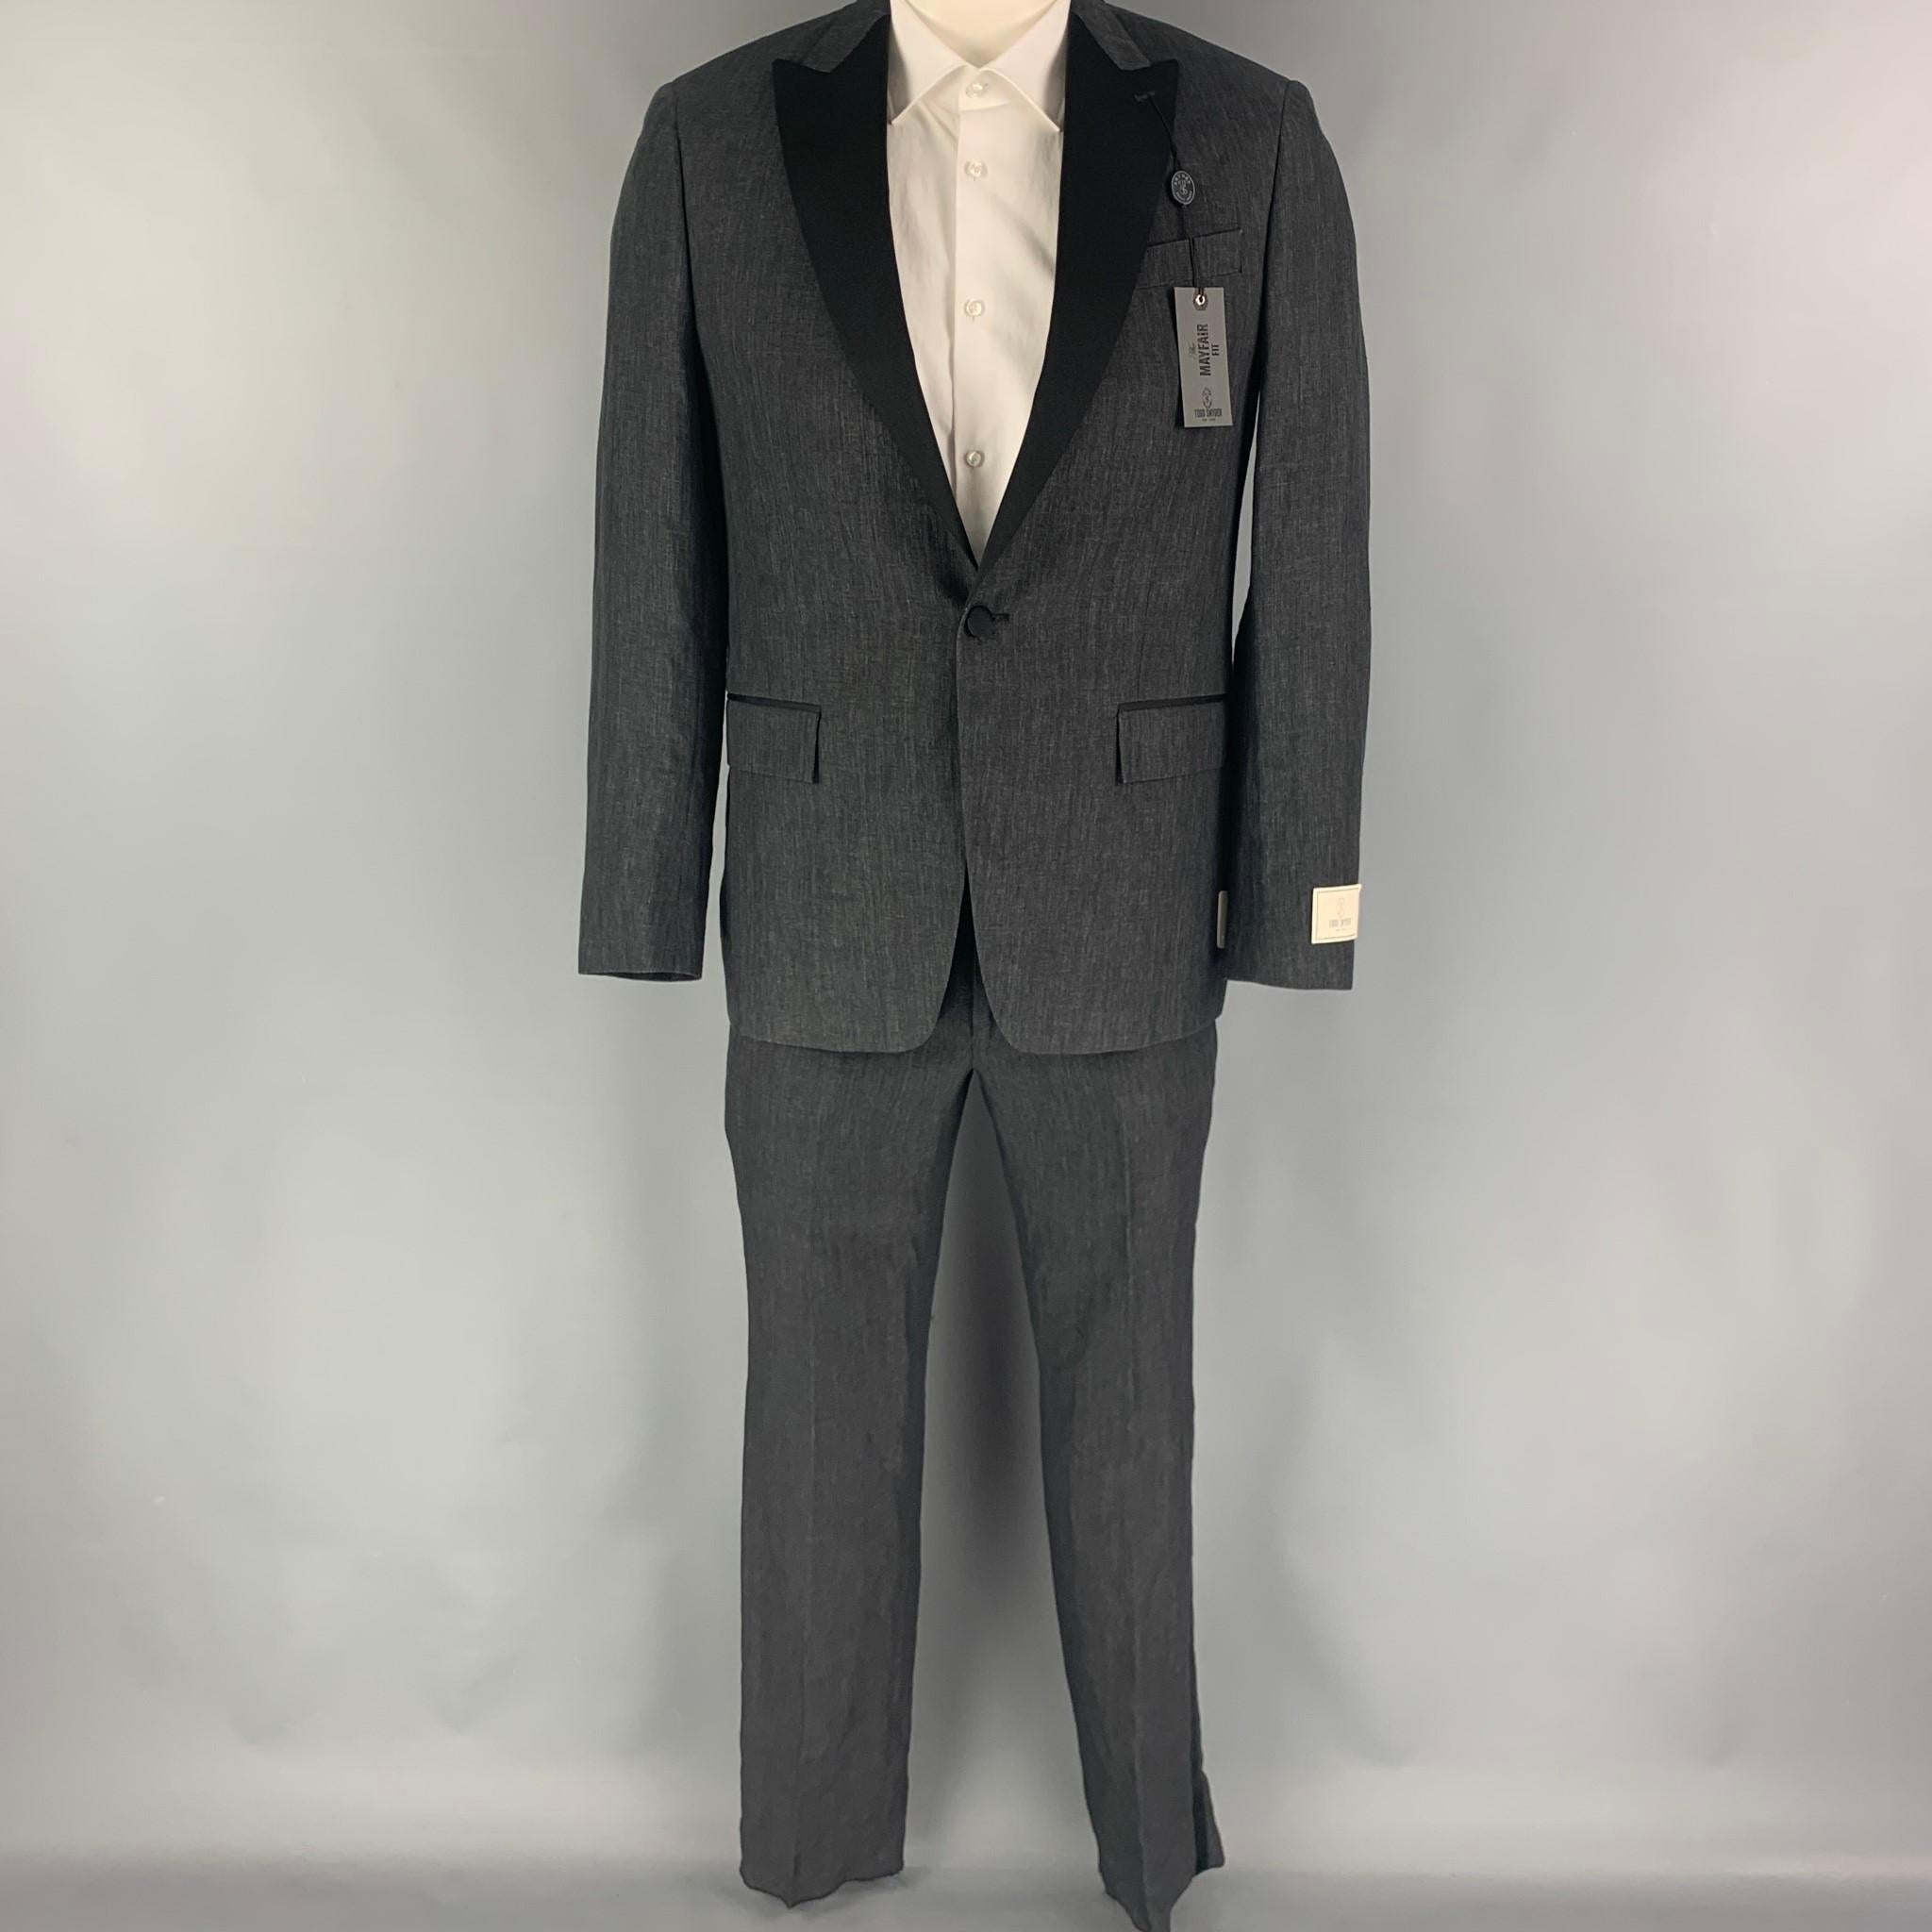 TODD SNYDER suit comes in a charcoal black linen with a full liner and includes a single breasted, single button sport coat with peak lapel and matching flat front trousers.

New with tags.
Marked: 40 R

Measurements:

-Jacket
Shoulder: 17